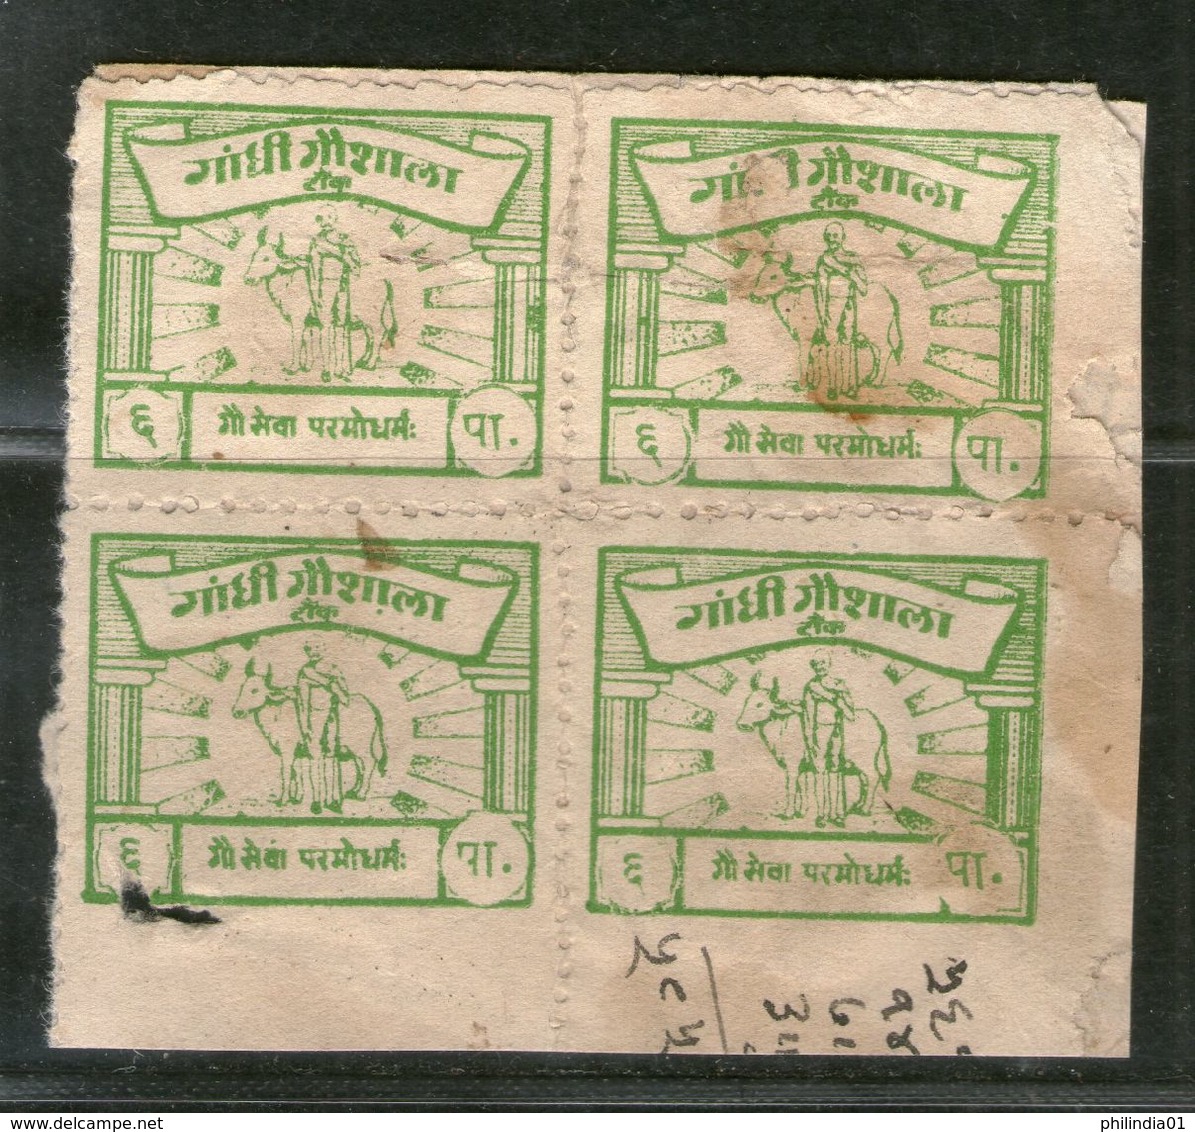 India 6ps Gandhi Gaushala Tonk Charity Label BLK/4 Extremely RARE # 3710 - Timbres De Bienfaisance